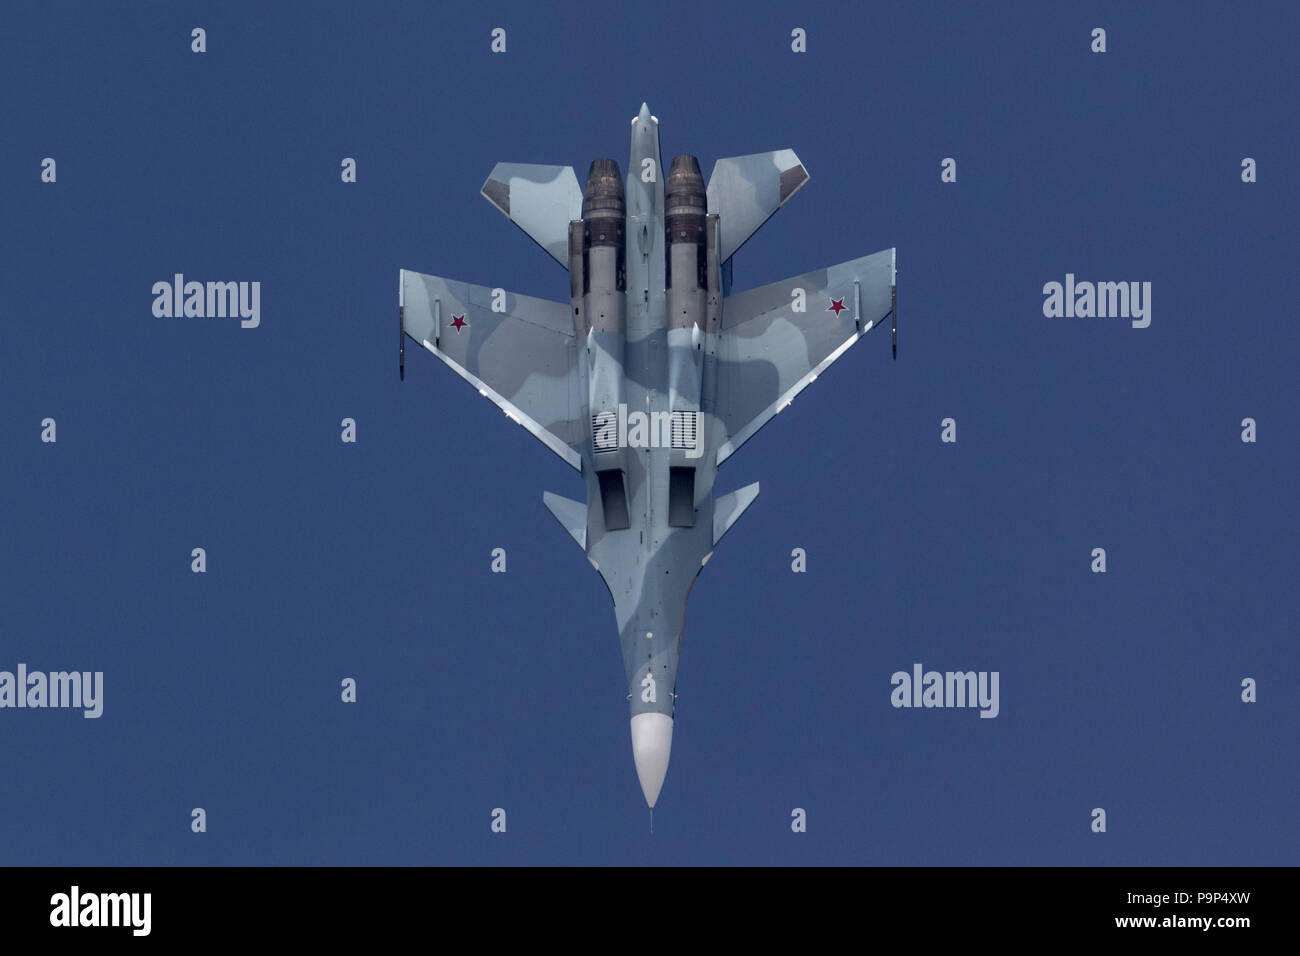 The Sukhoi Su-30SM jet fighter of Russian Navy performs its demonstration flight at MAKS-2015 airshow near Zhukovsky, Moscow Region, Russia. Stock Photo